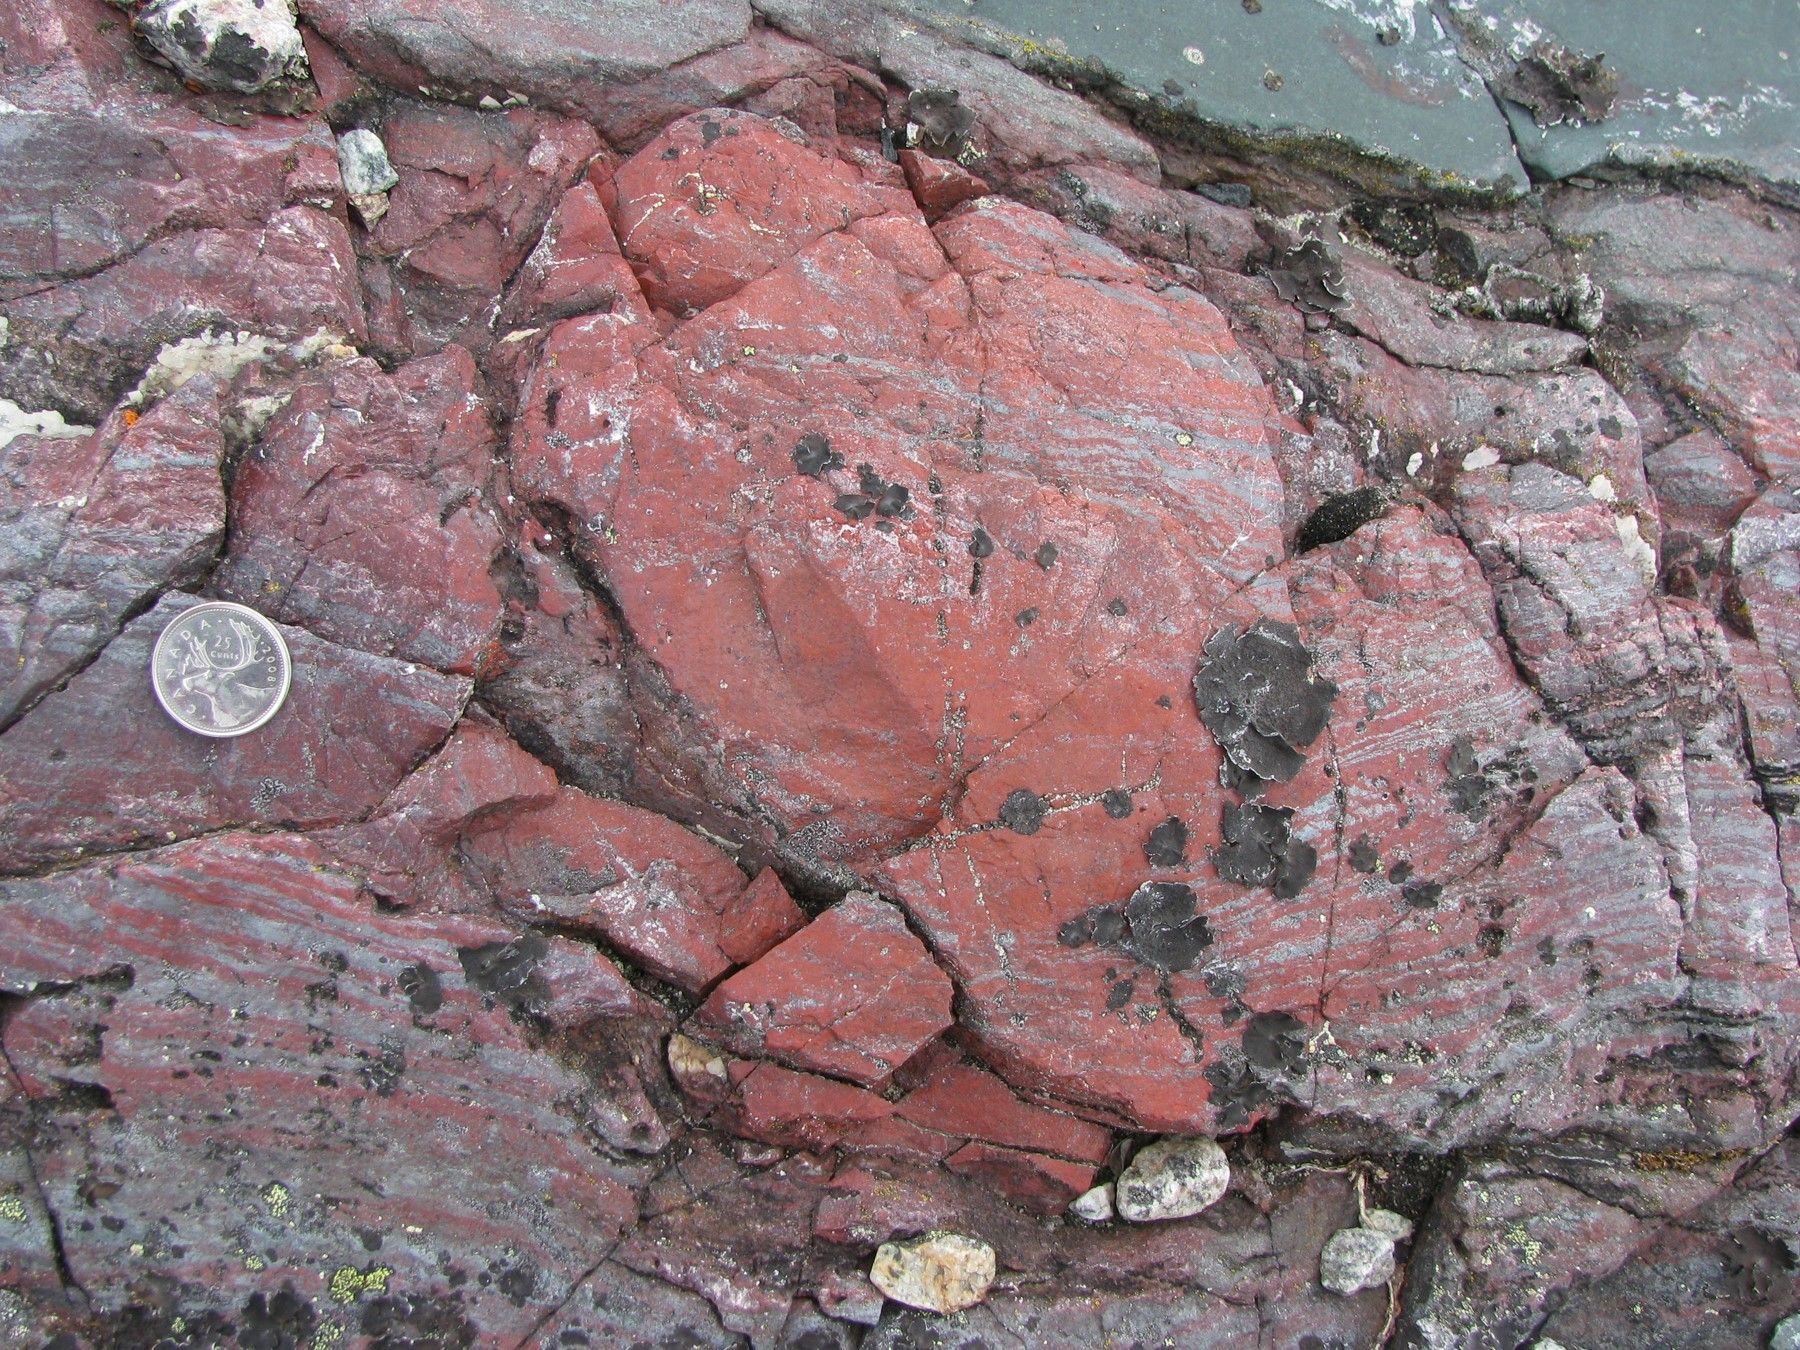 Pinkish red rock with a Canadian quarter placed next to it